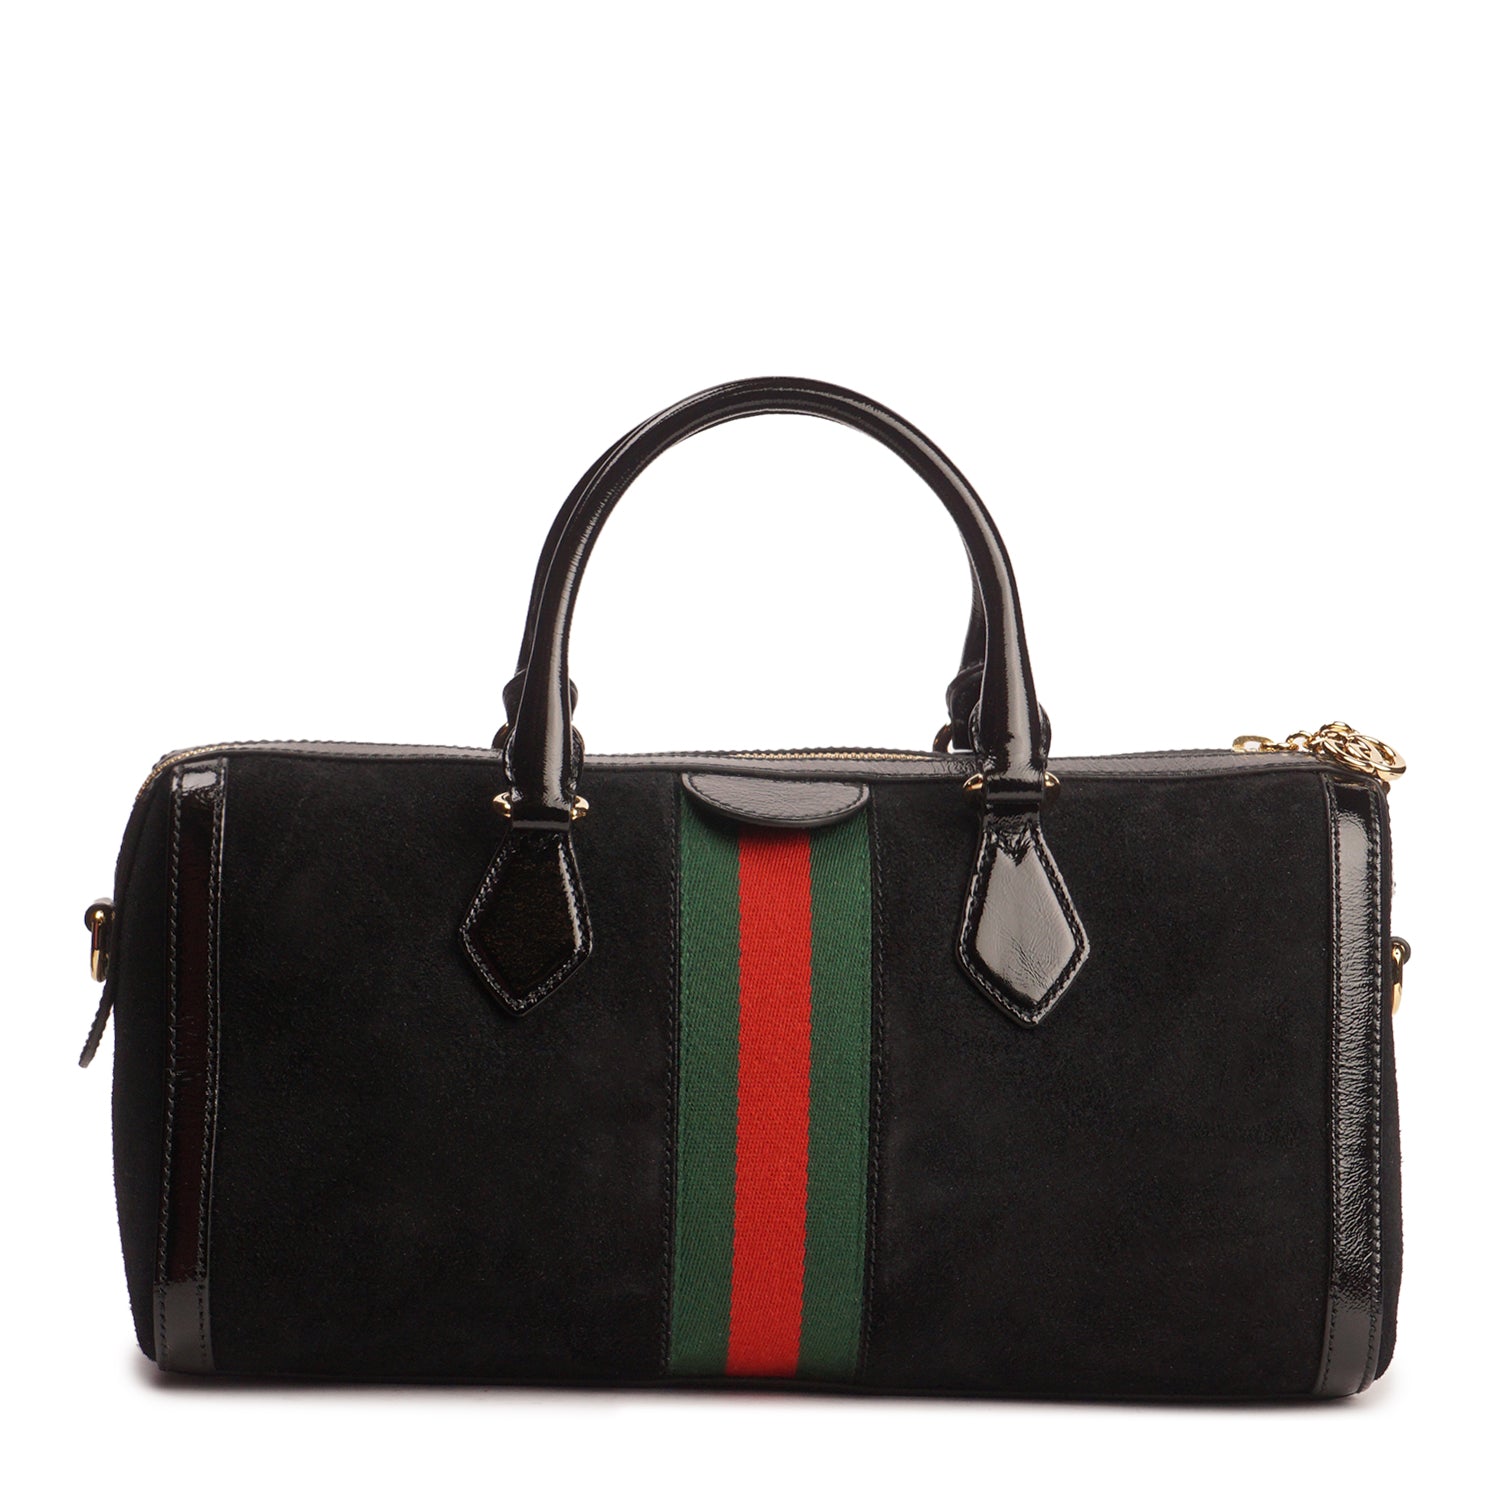 GUCCI OPHIDIA TOP HANDLE BAG IN BLACK